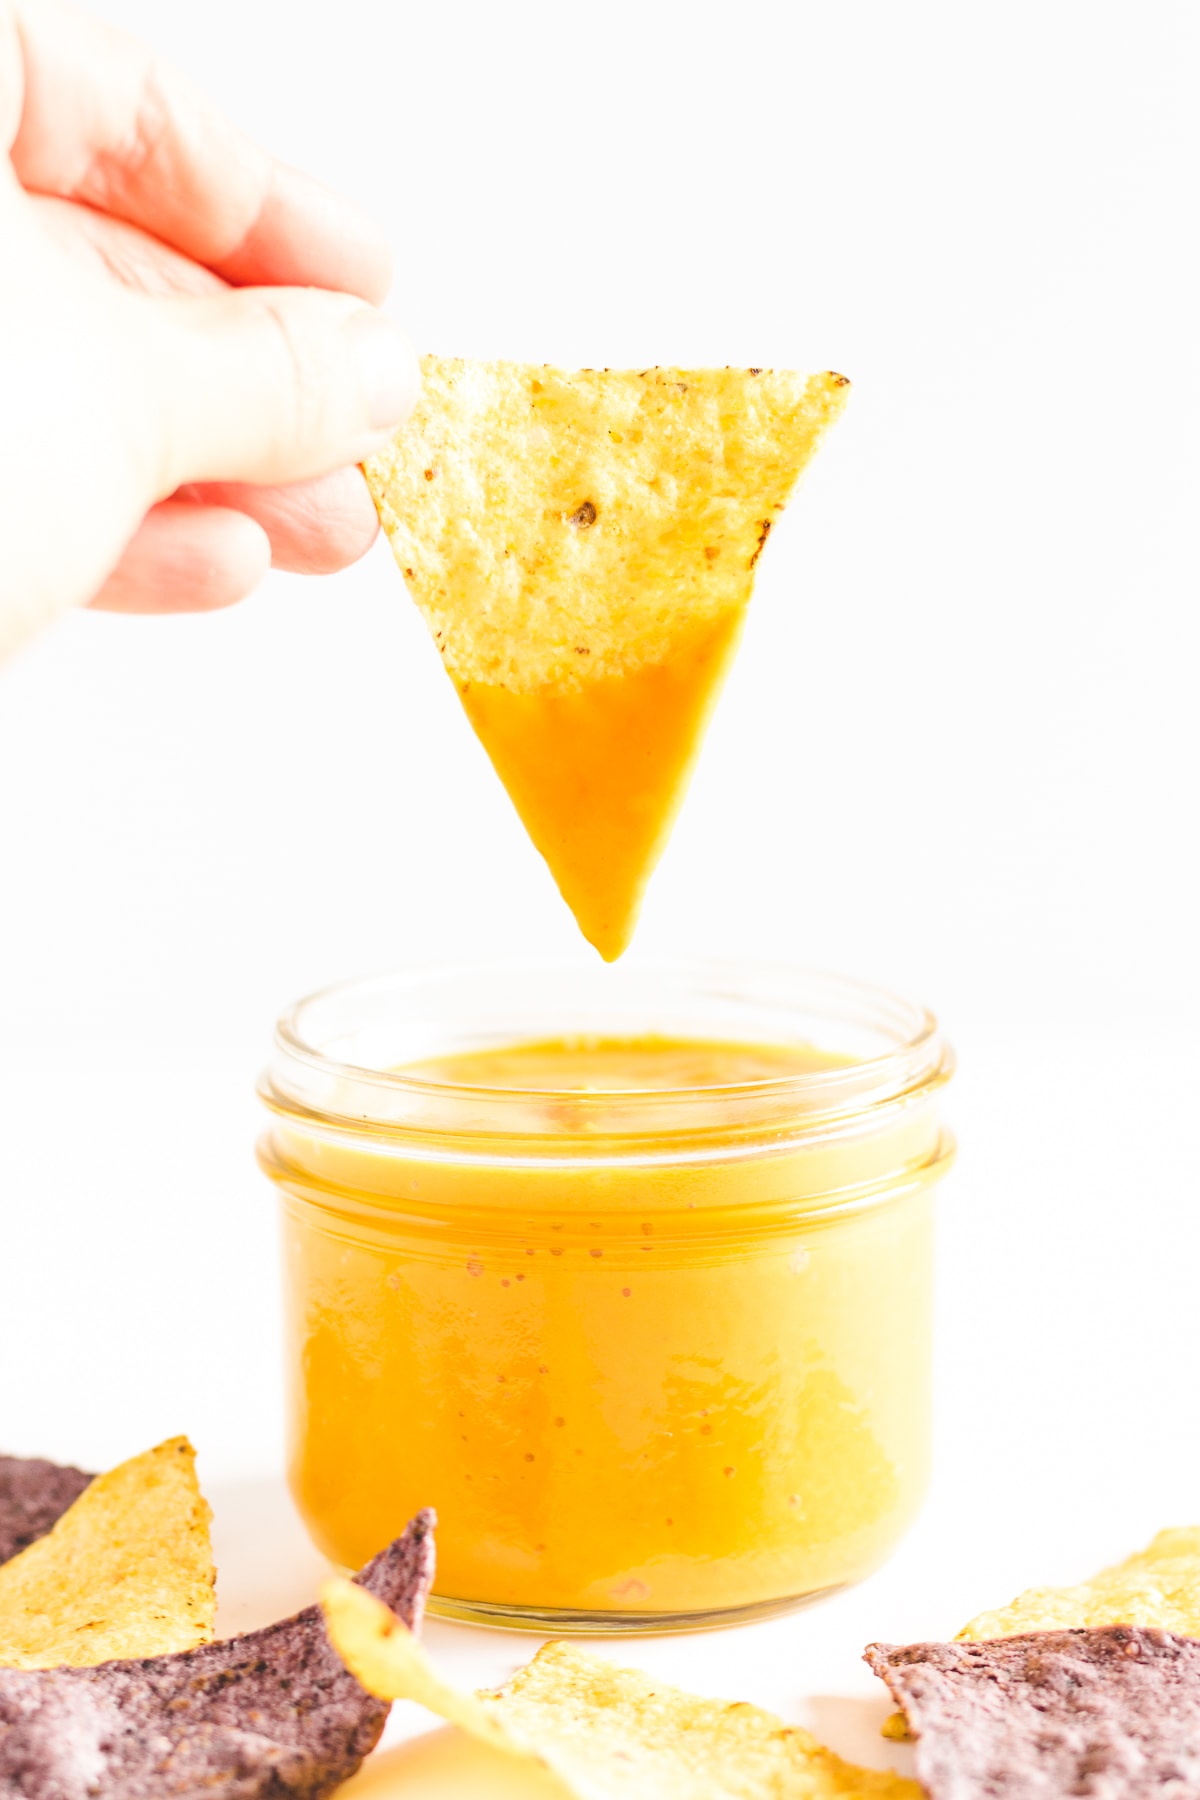 Hand holding tortilla chip being dipped into a jar of homemade vegan and nut free nacho cheese sauce.